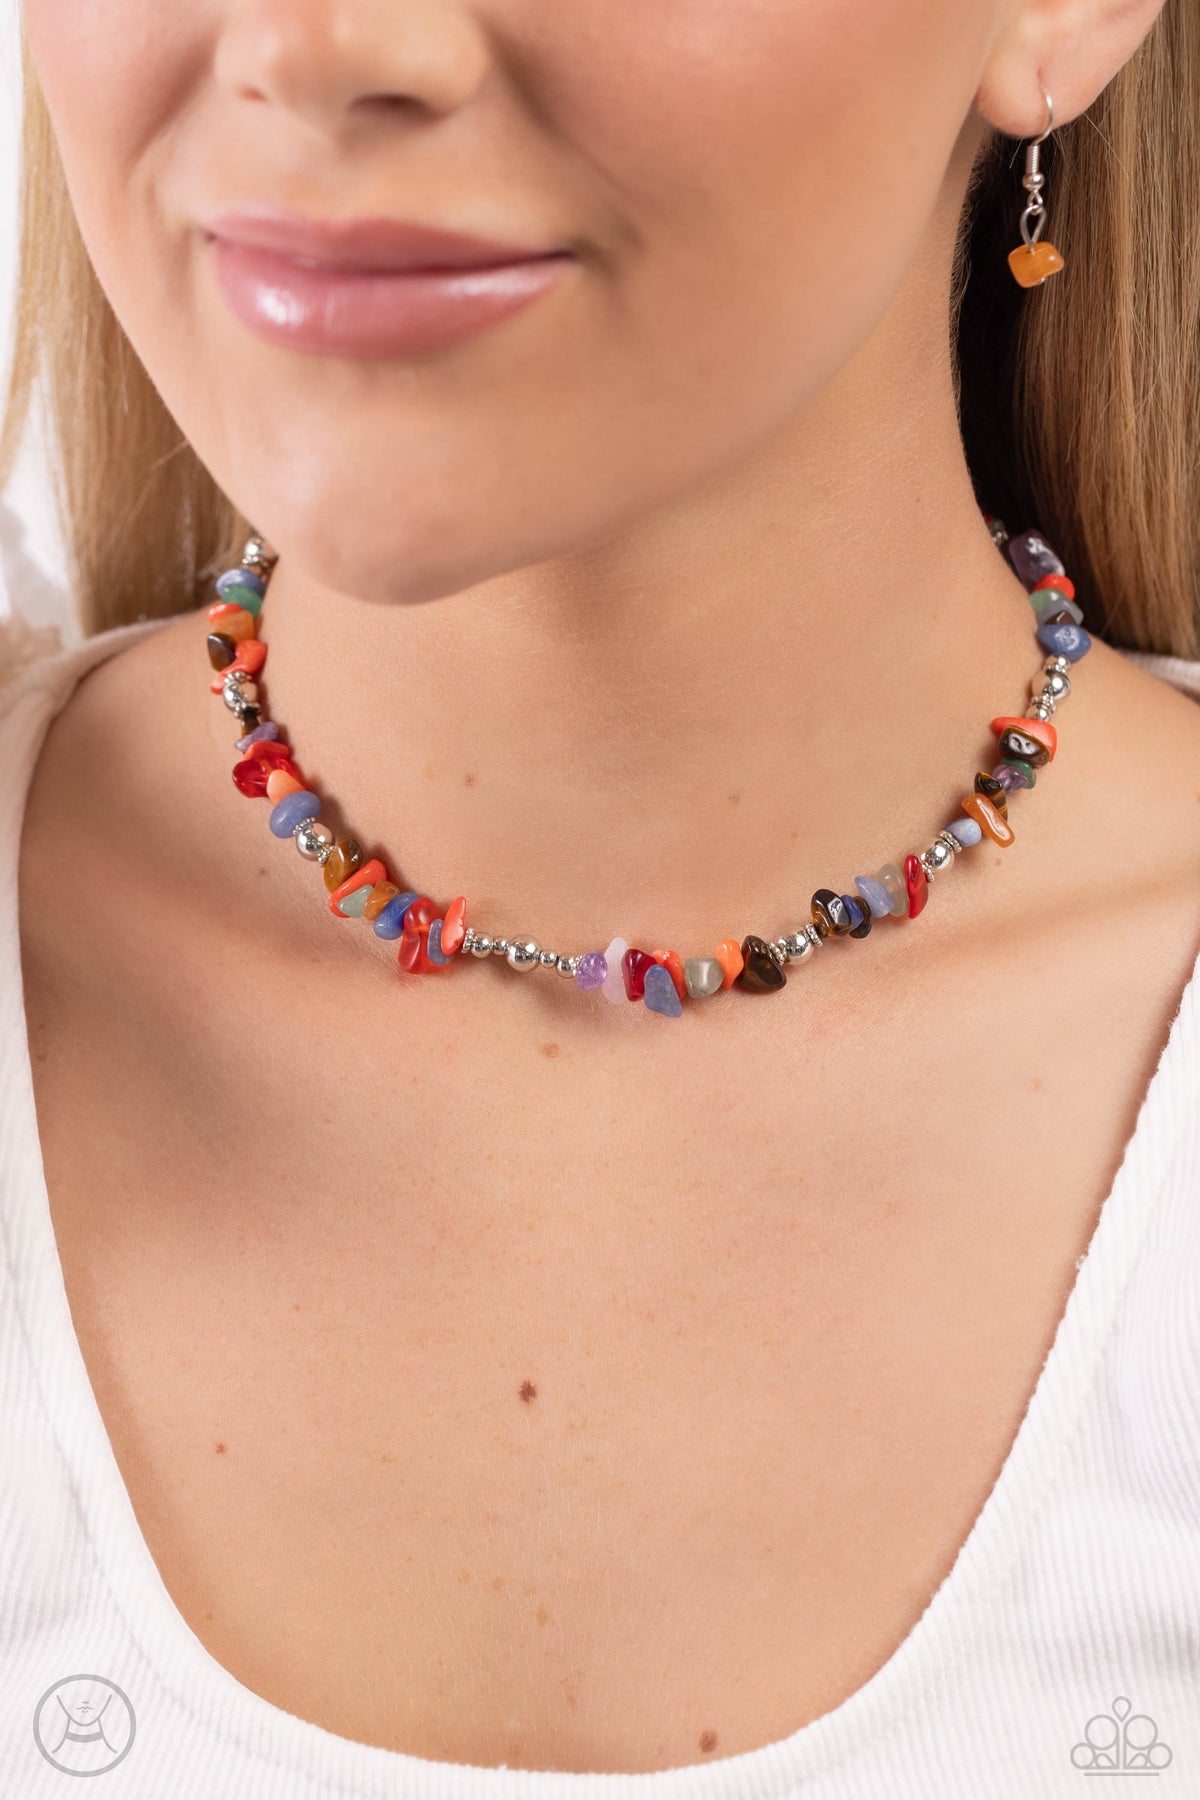 Carved Confidence Multi Stone Choker Necklace - Paparazzi Accessories-on model - CarasShop.com - $5 Jewelry by Cara Jewels